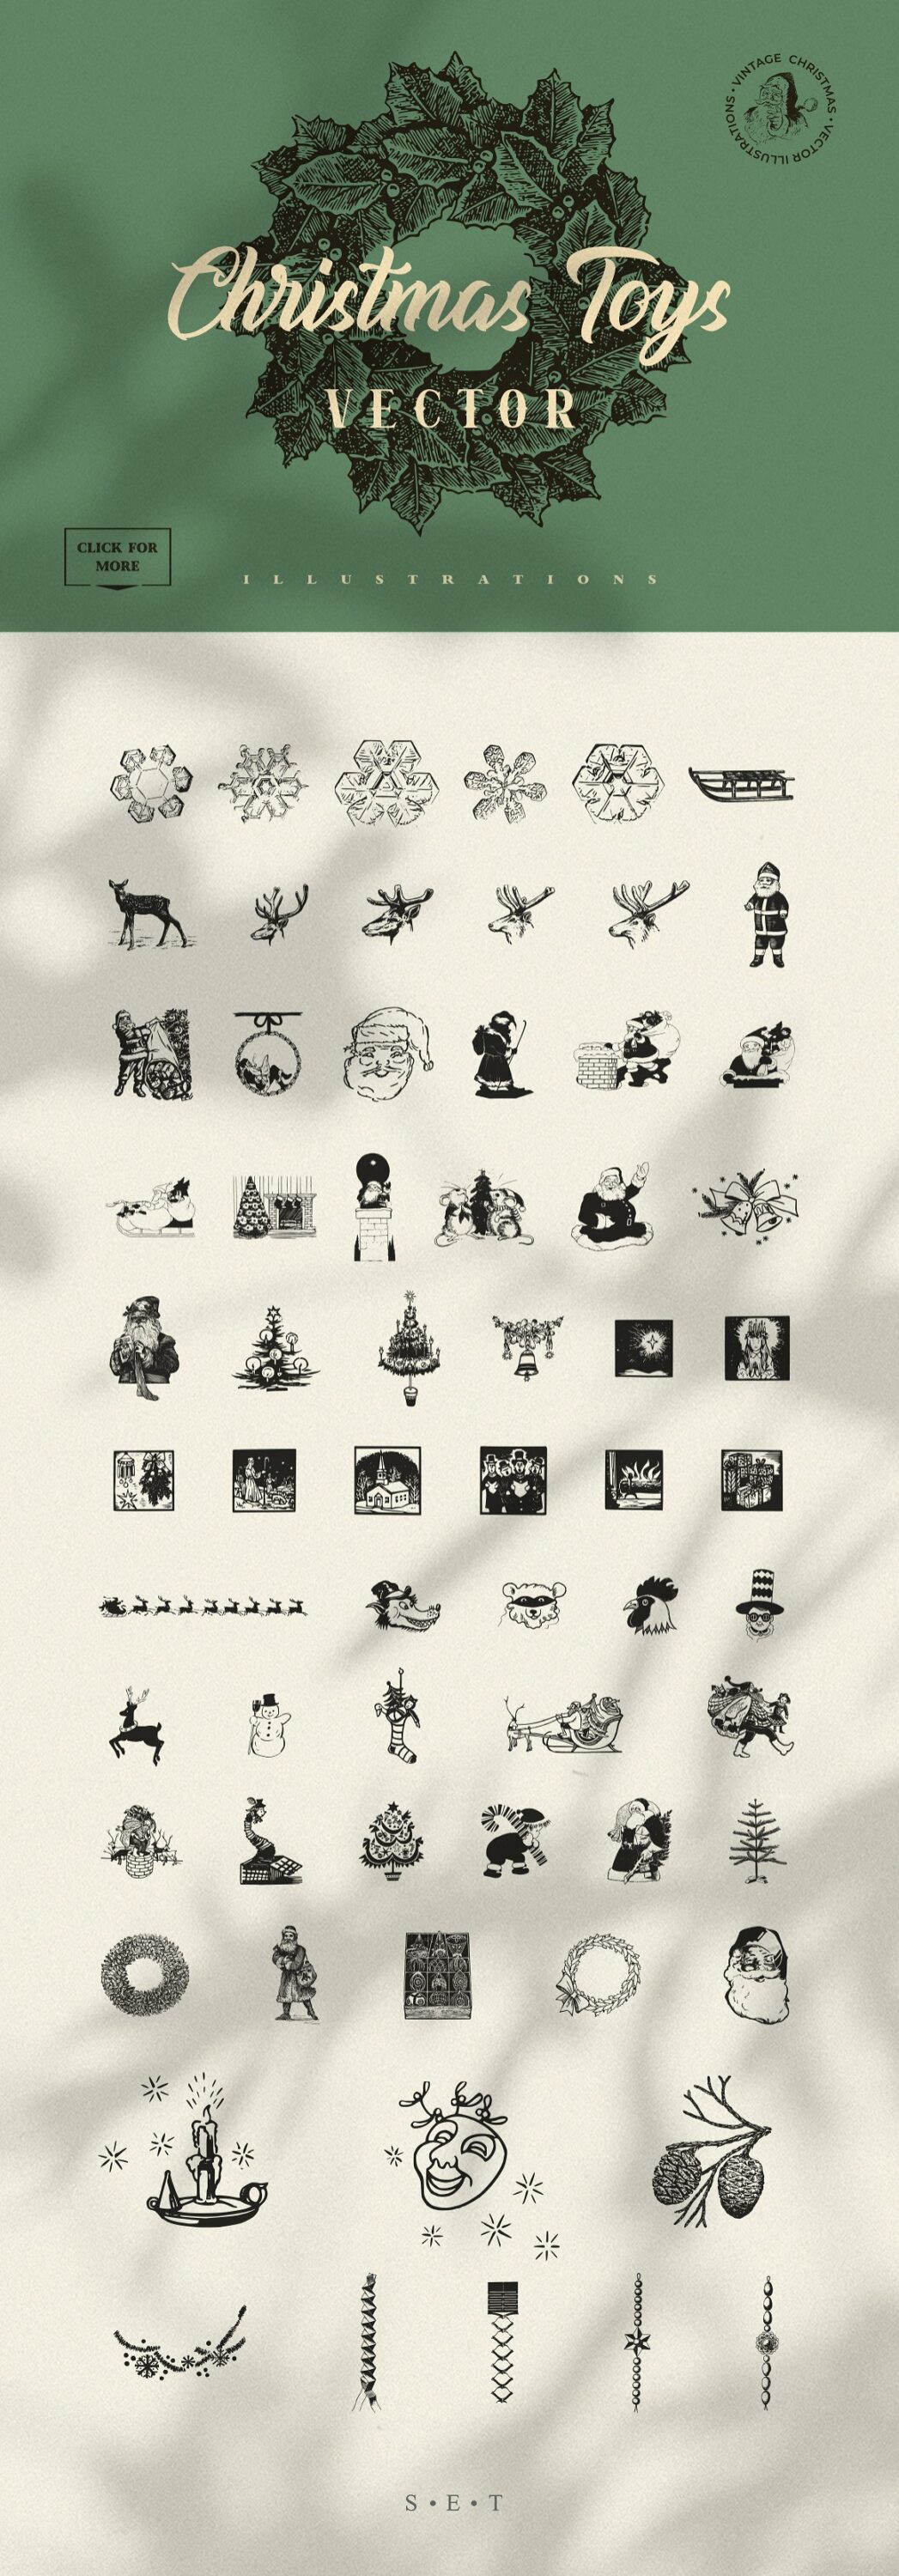 Great animal icons in retro style.